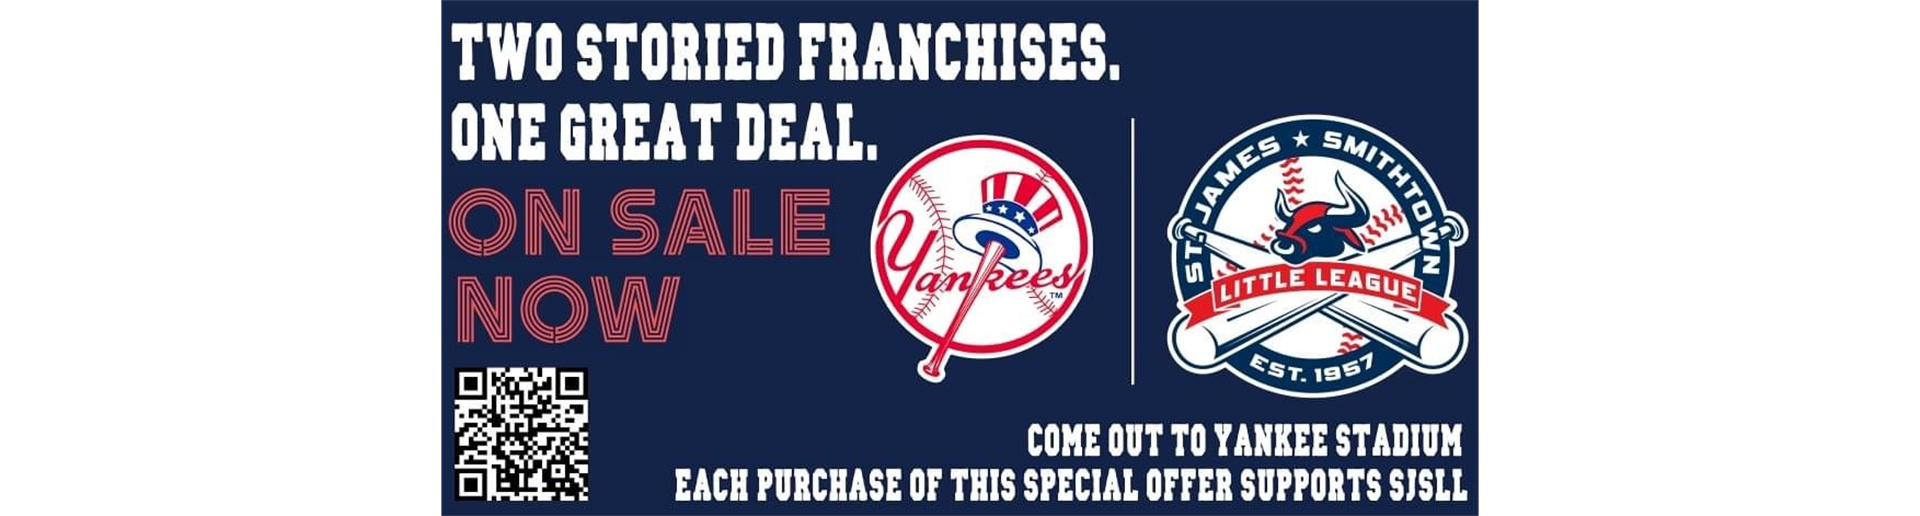 Special offer on Yankees tickets for SJSLL families